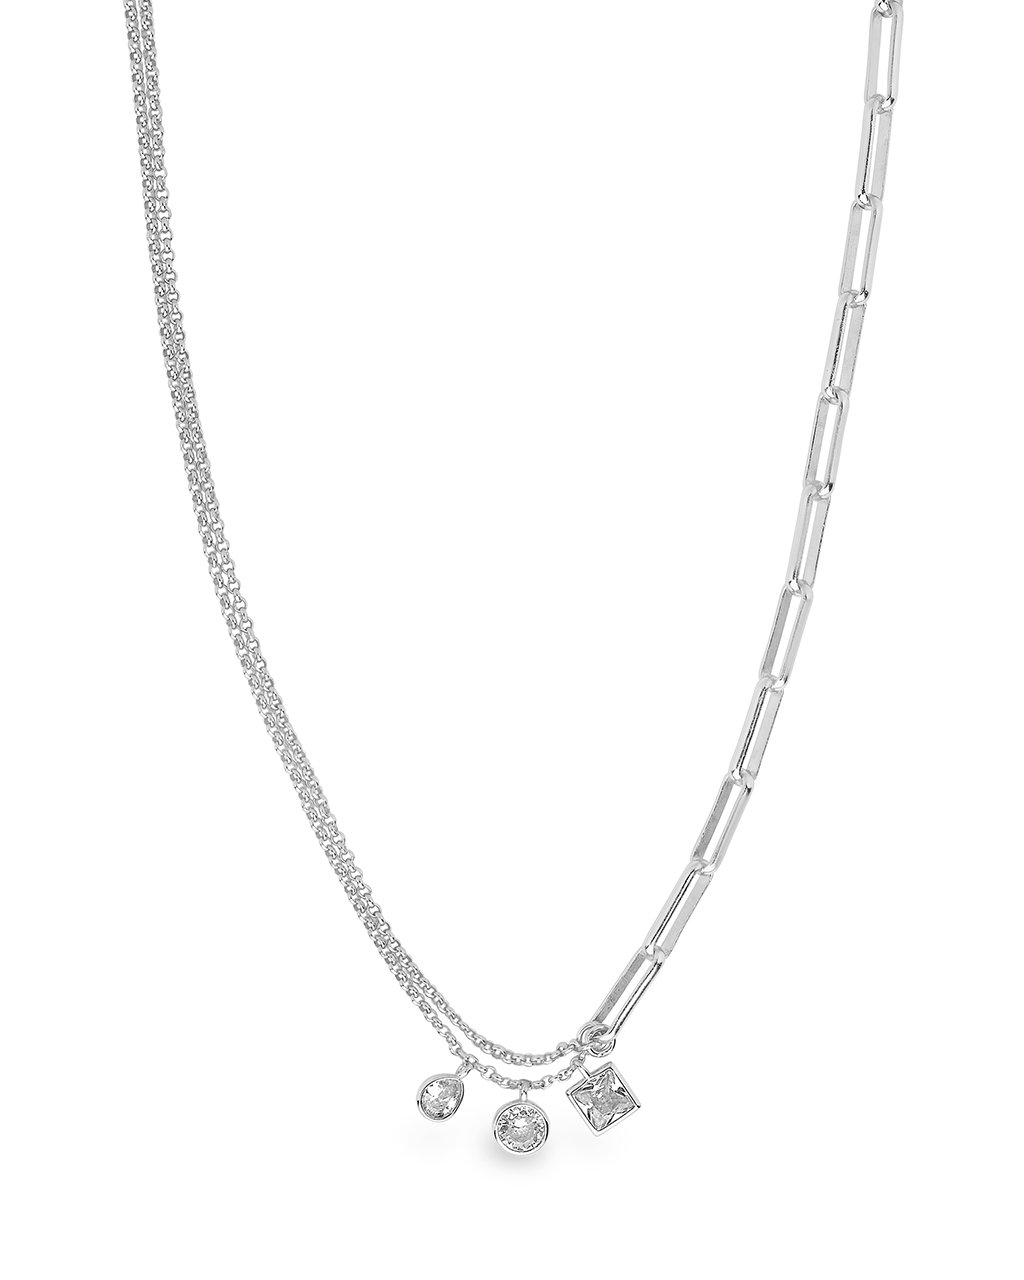 Delicate Link Necklace with CZ Charms Necklace Sterling Forever Silver 